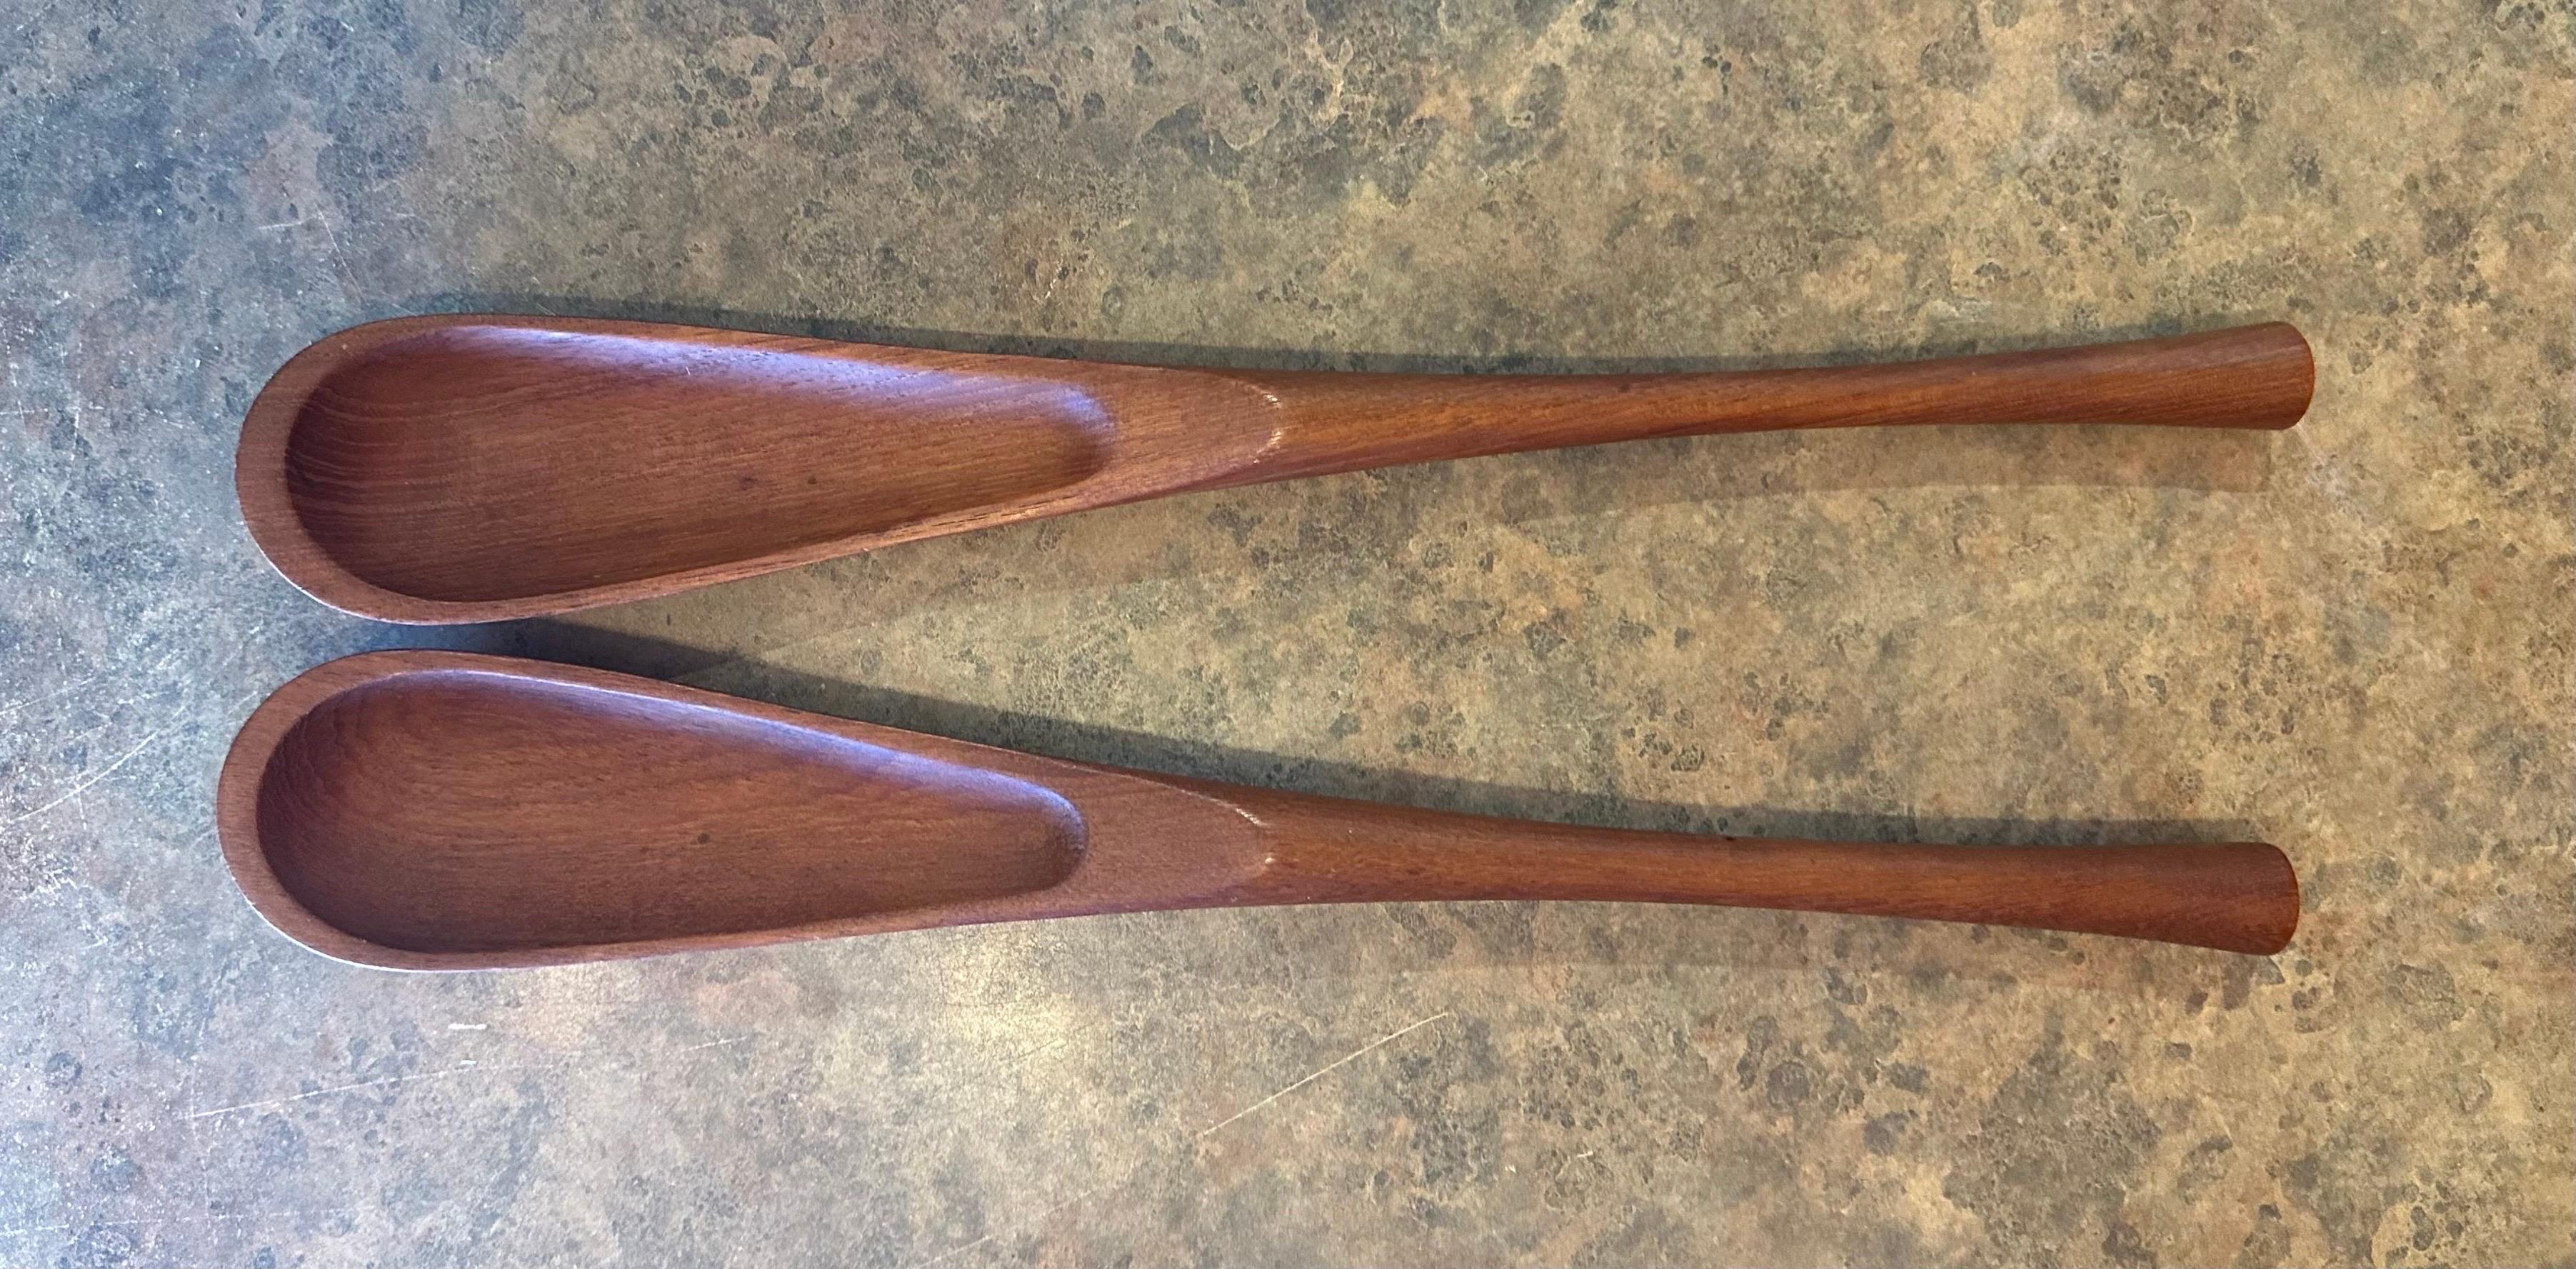 Rare Pair of Solid Teak Salad Servers by Jens Quistgaard for Dansk In Good Condition For Sale In San Diego, CA